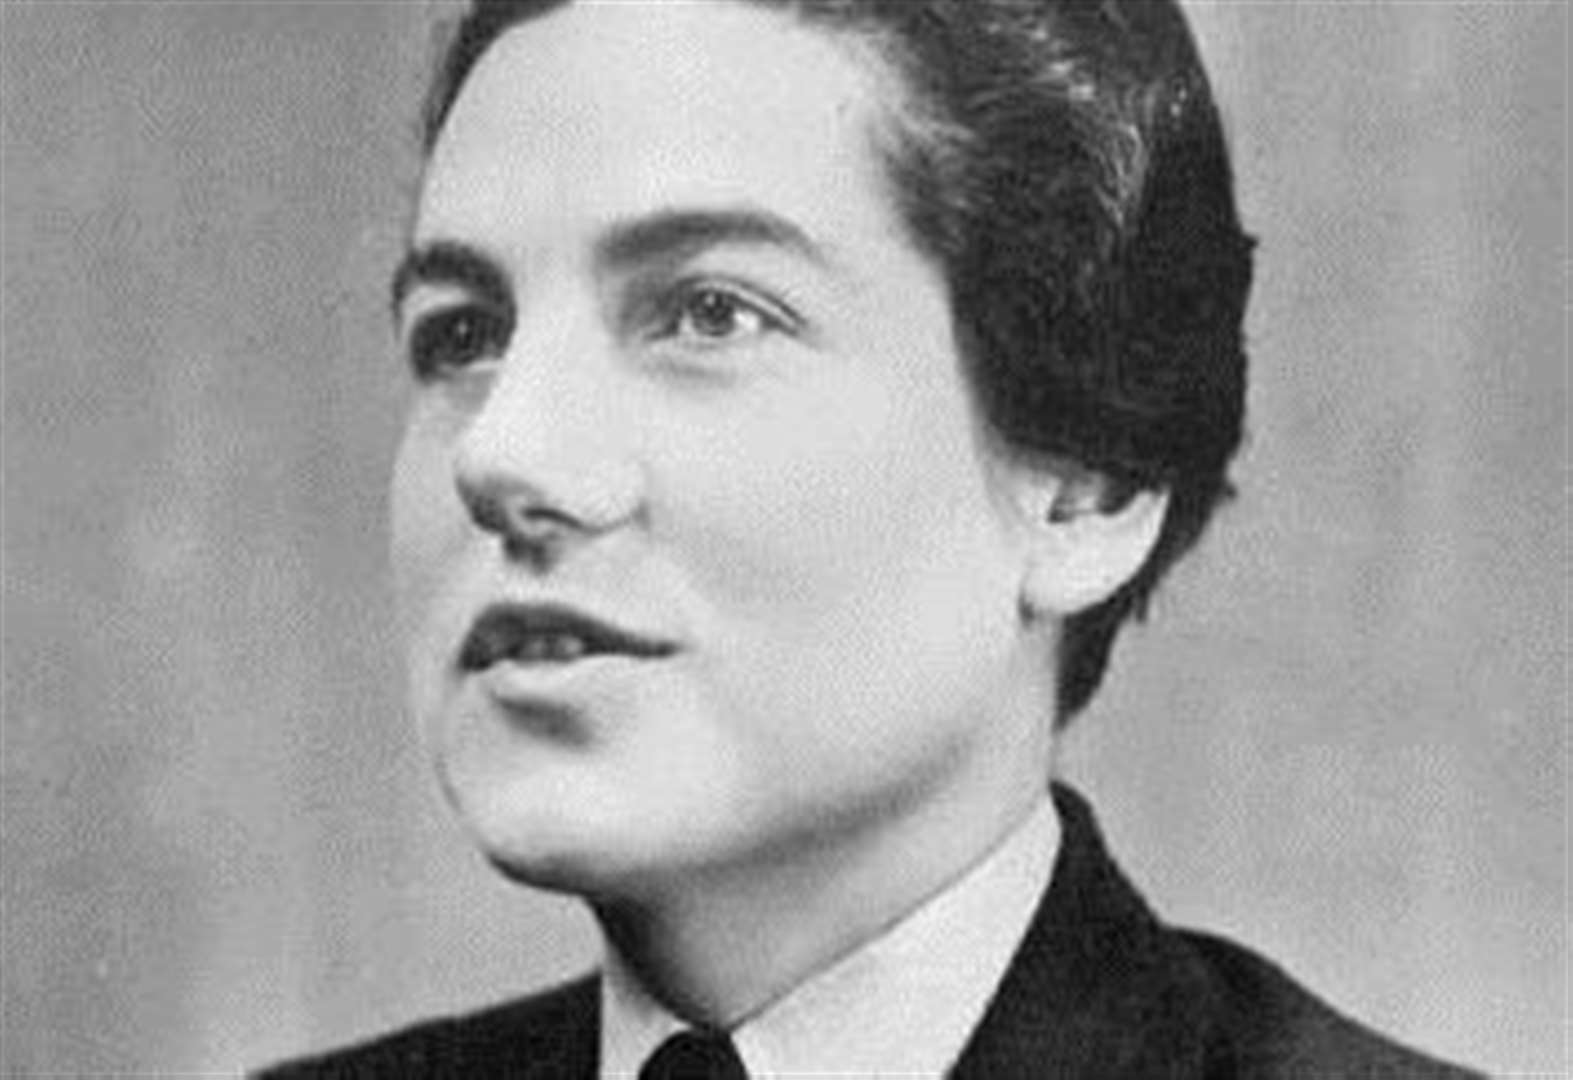 Extraordinary tale of first woman awarded George Cross